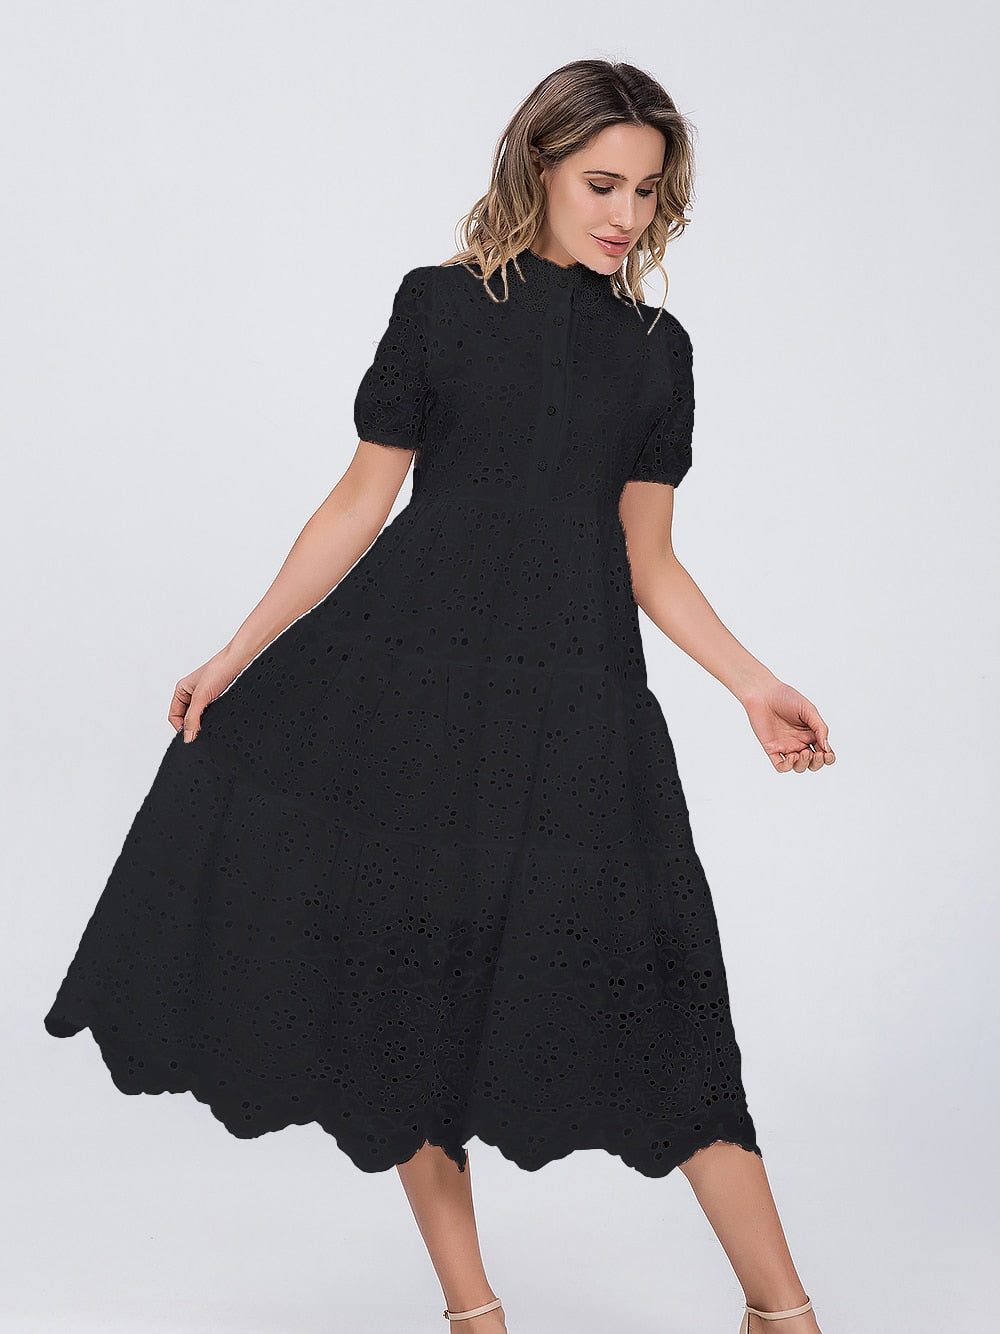 Piper Hollow Out Dress